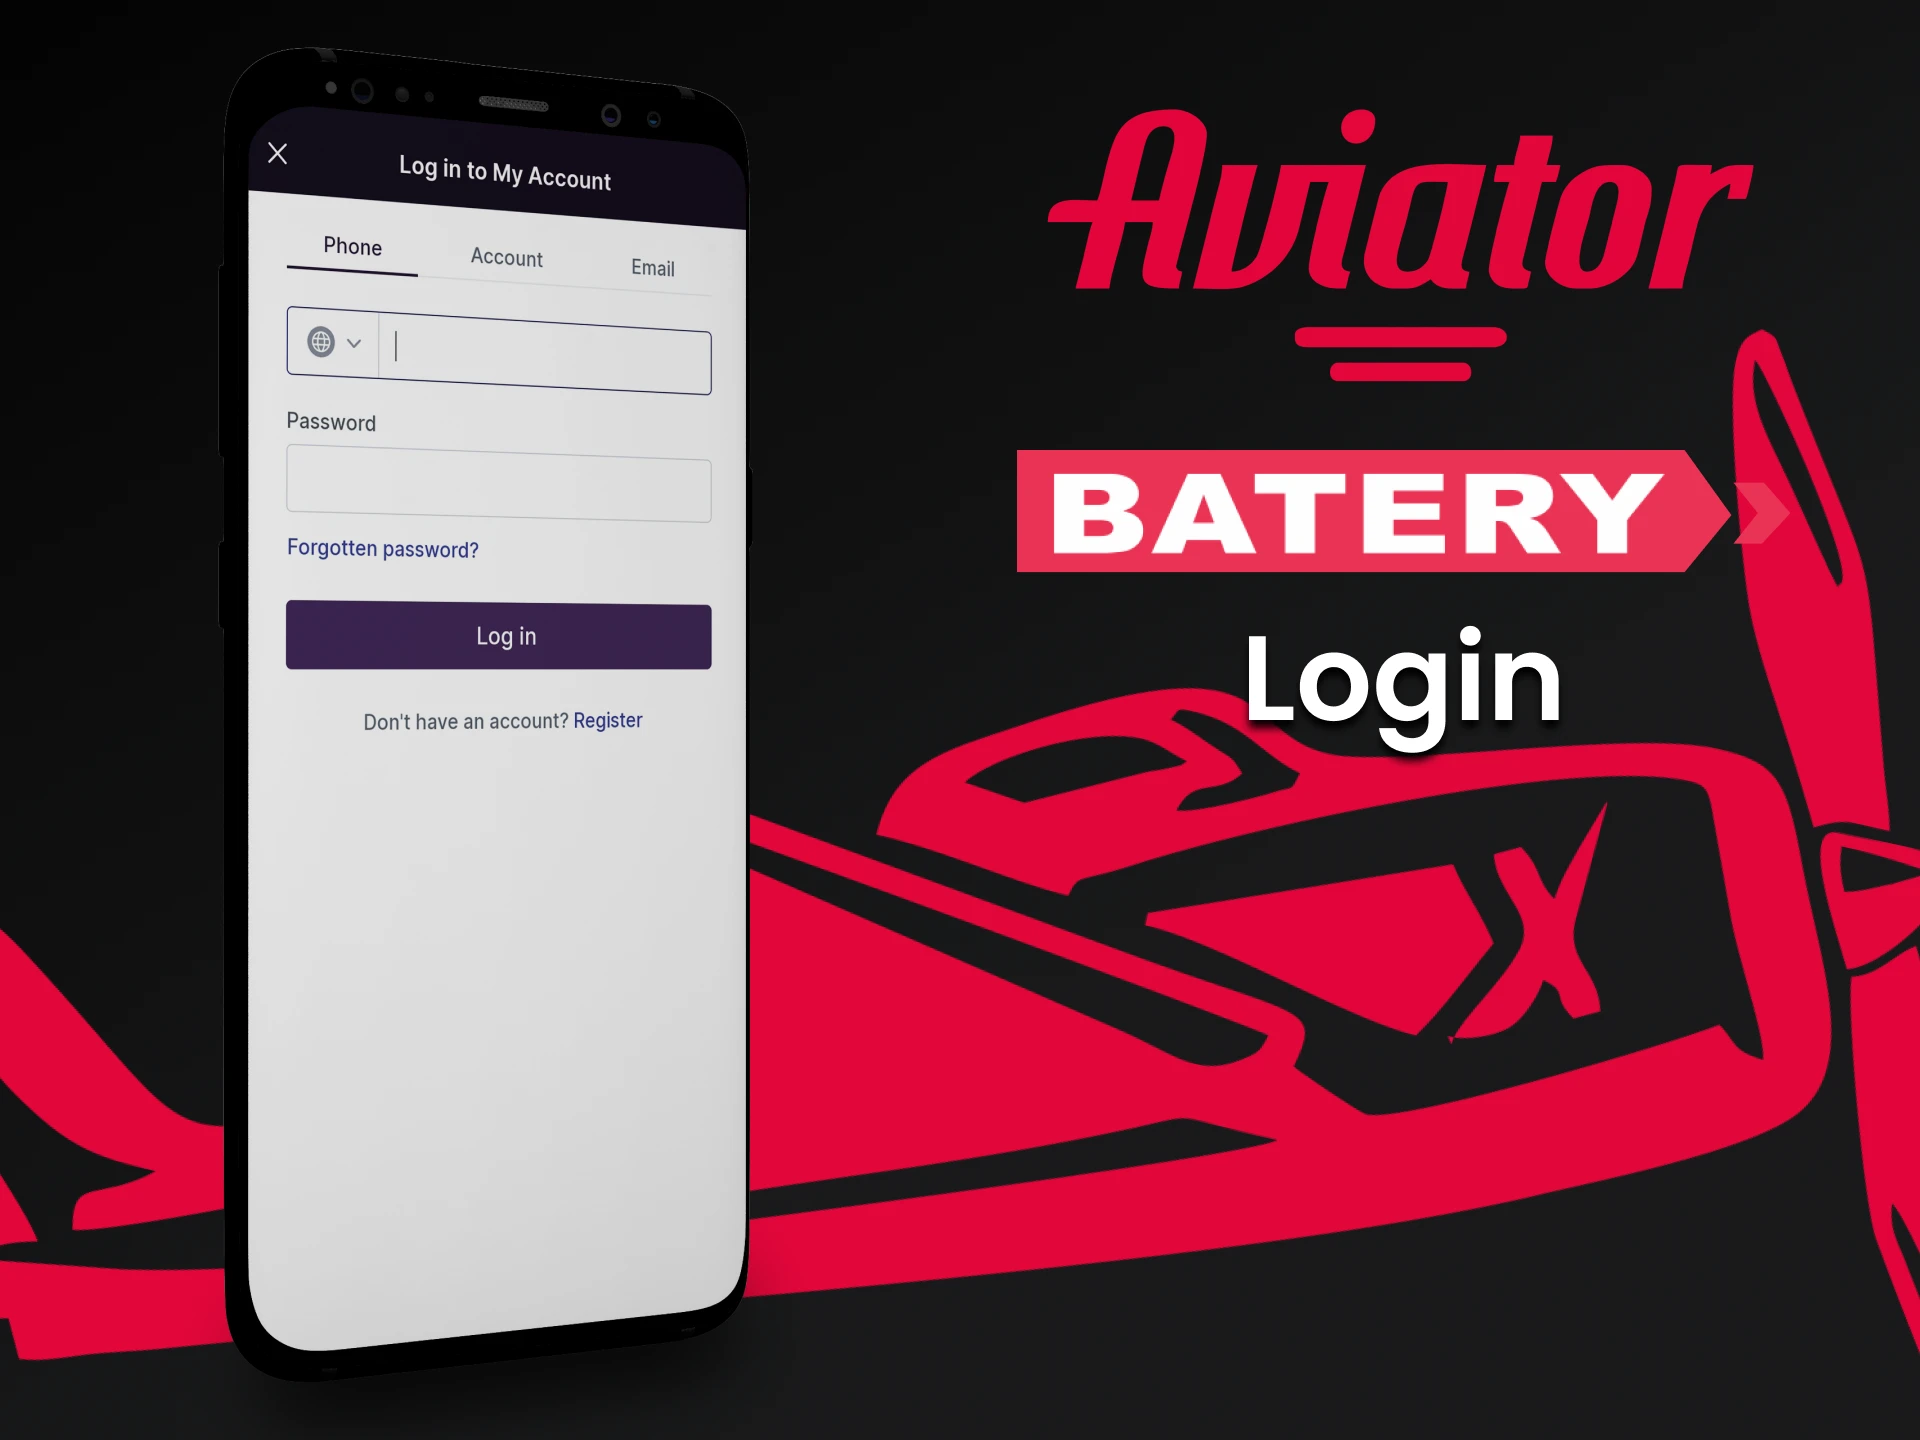 Sign in to your personal Batery account to play Aviator.